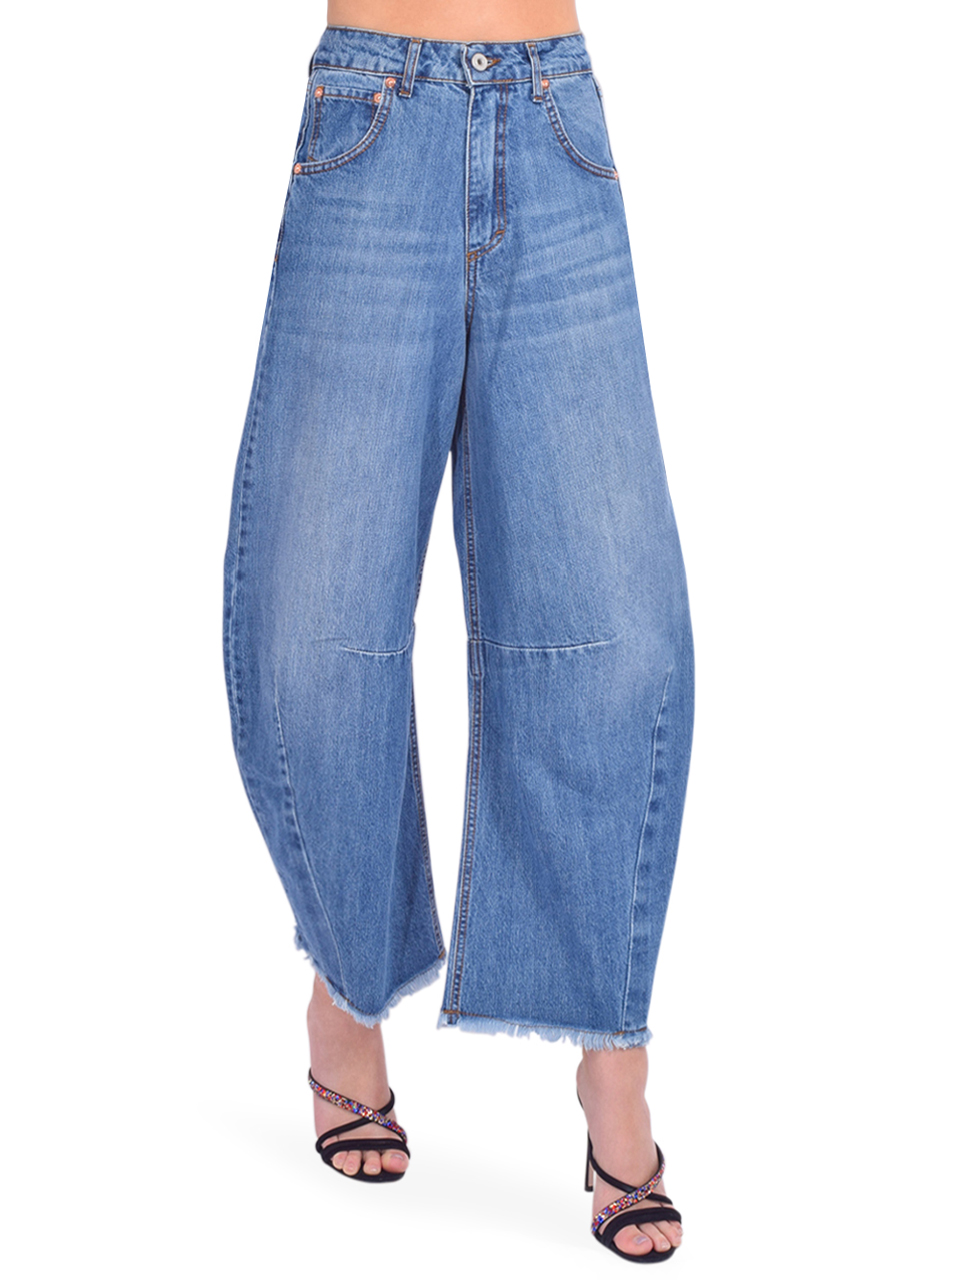 Ottod'Ame Horseshoes Barrel Jean in Blue Side View 